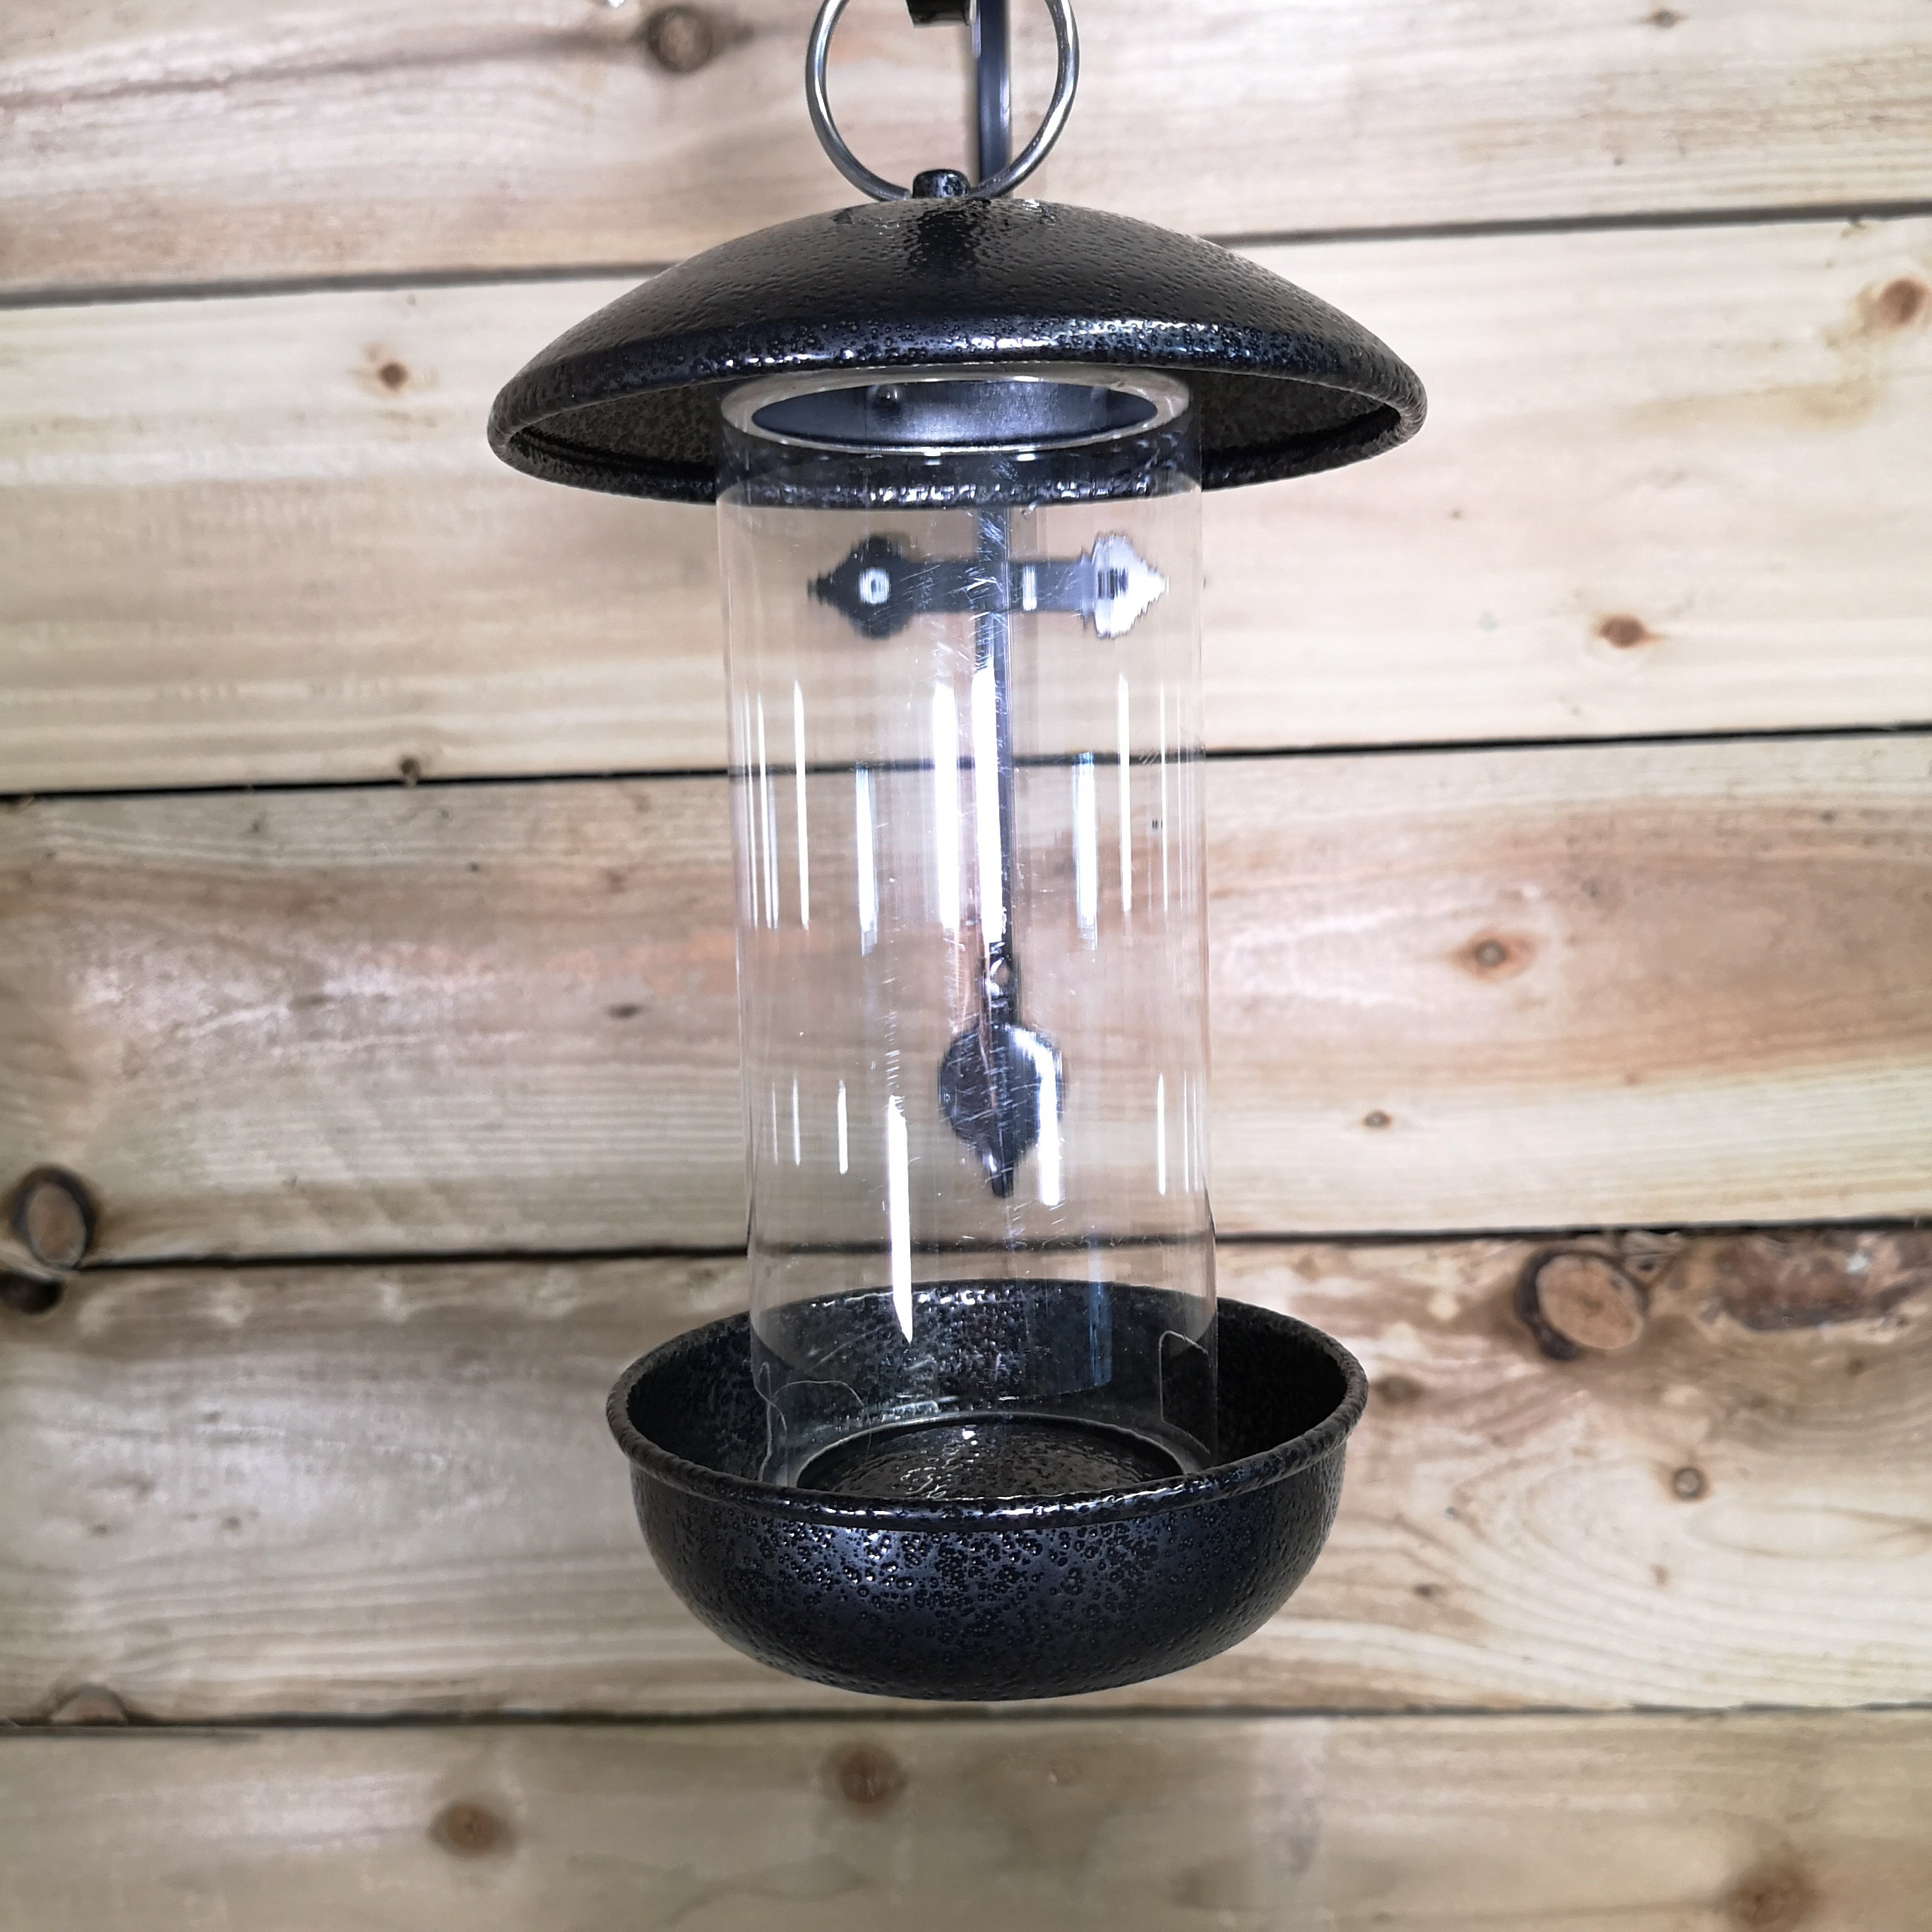 Tom Chambers 2 Port Garden Wild Bird Hanging Hammered Steel Black and Silver Seed Feeder